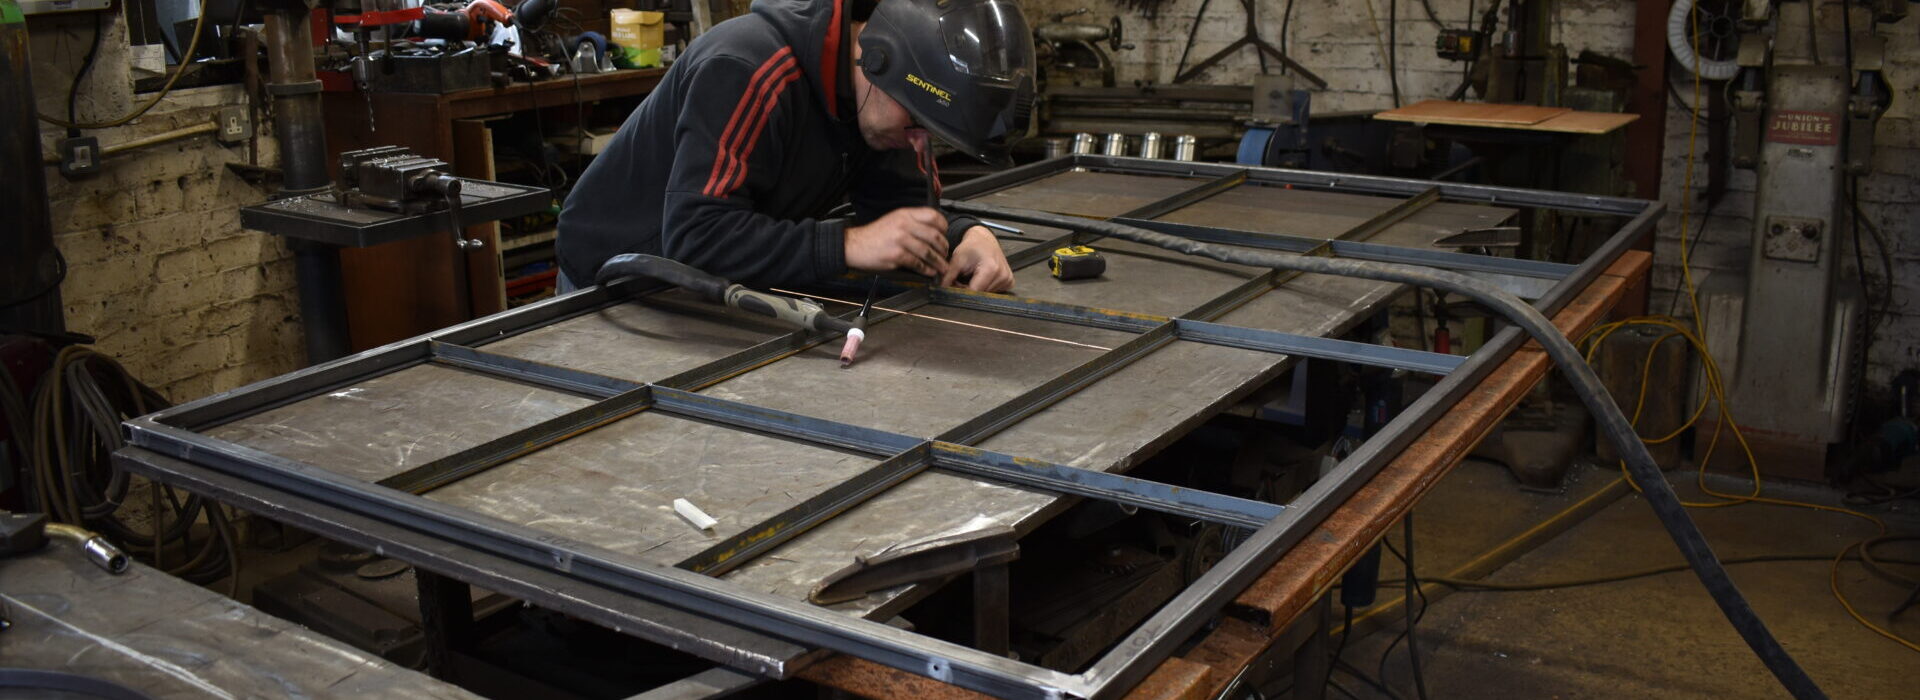 Making metal glazed internal doors and partitions in The Blacksmith Shop forge.